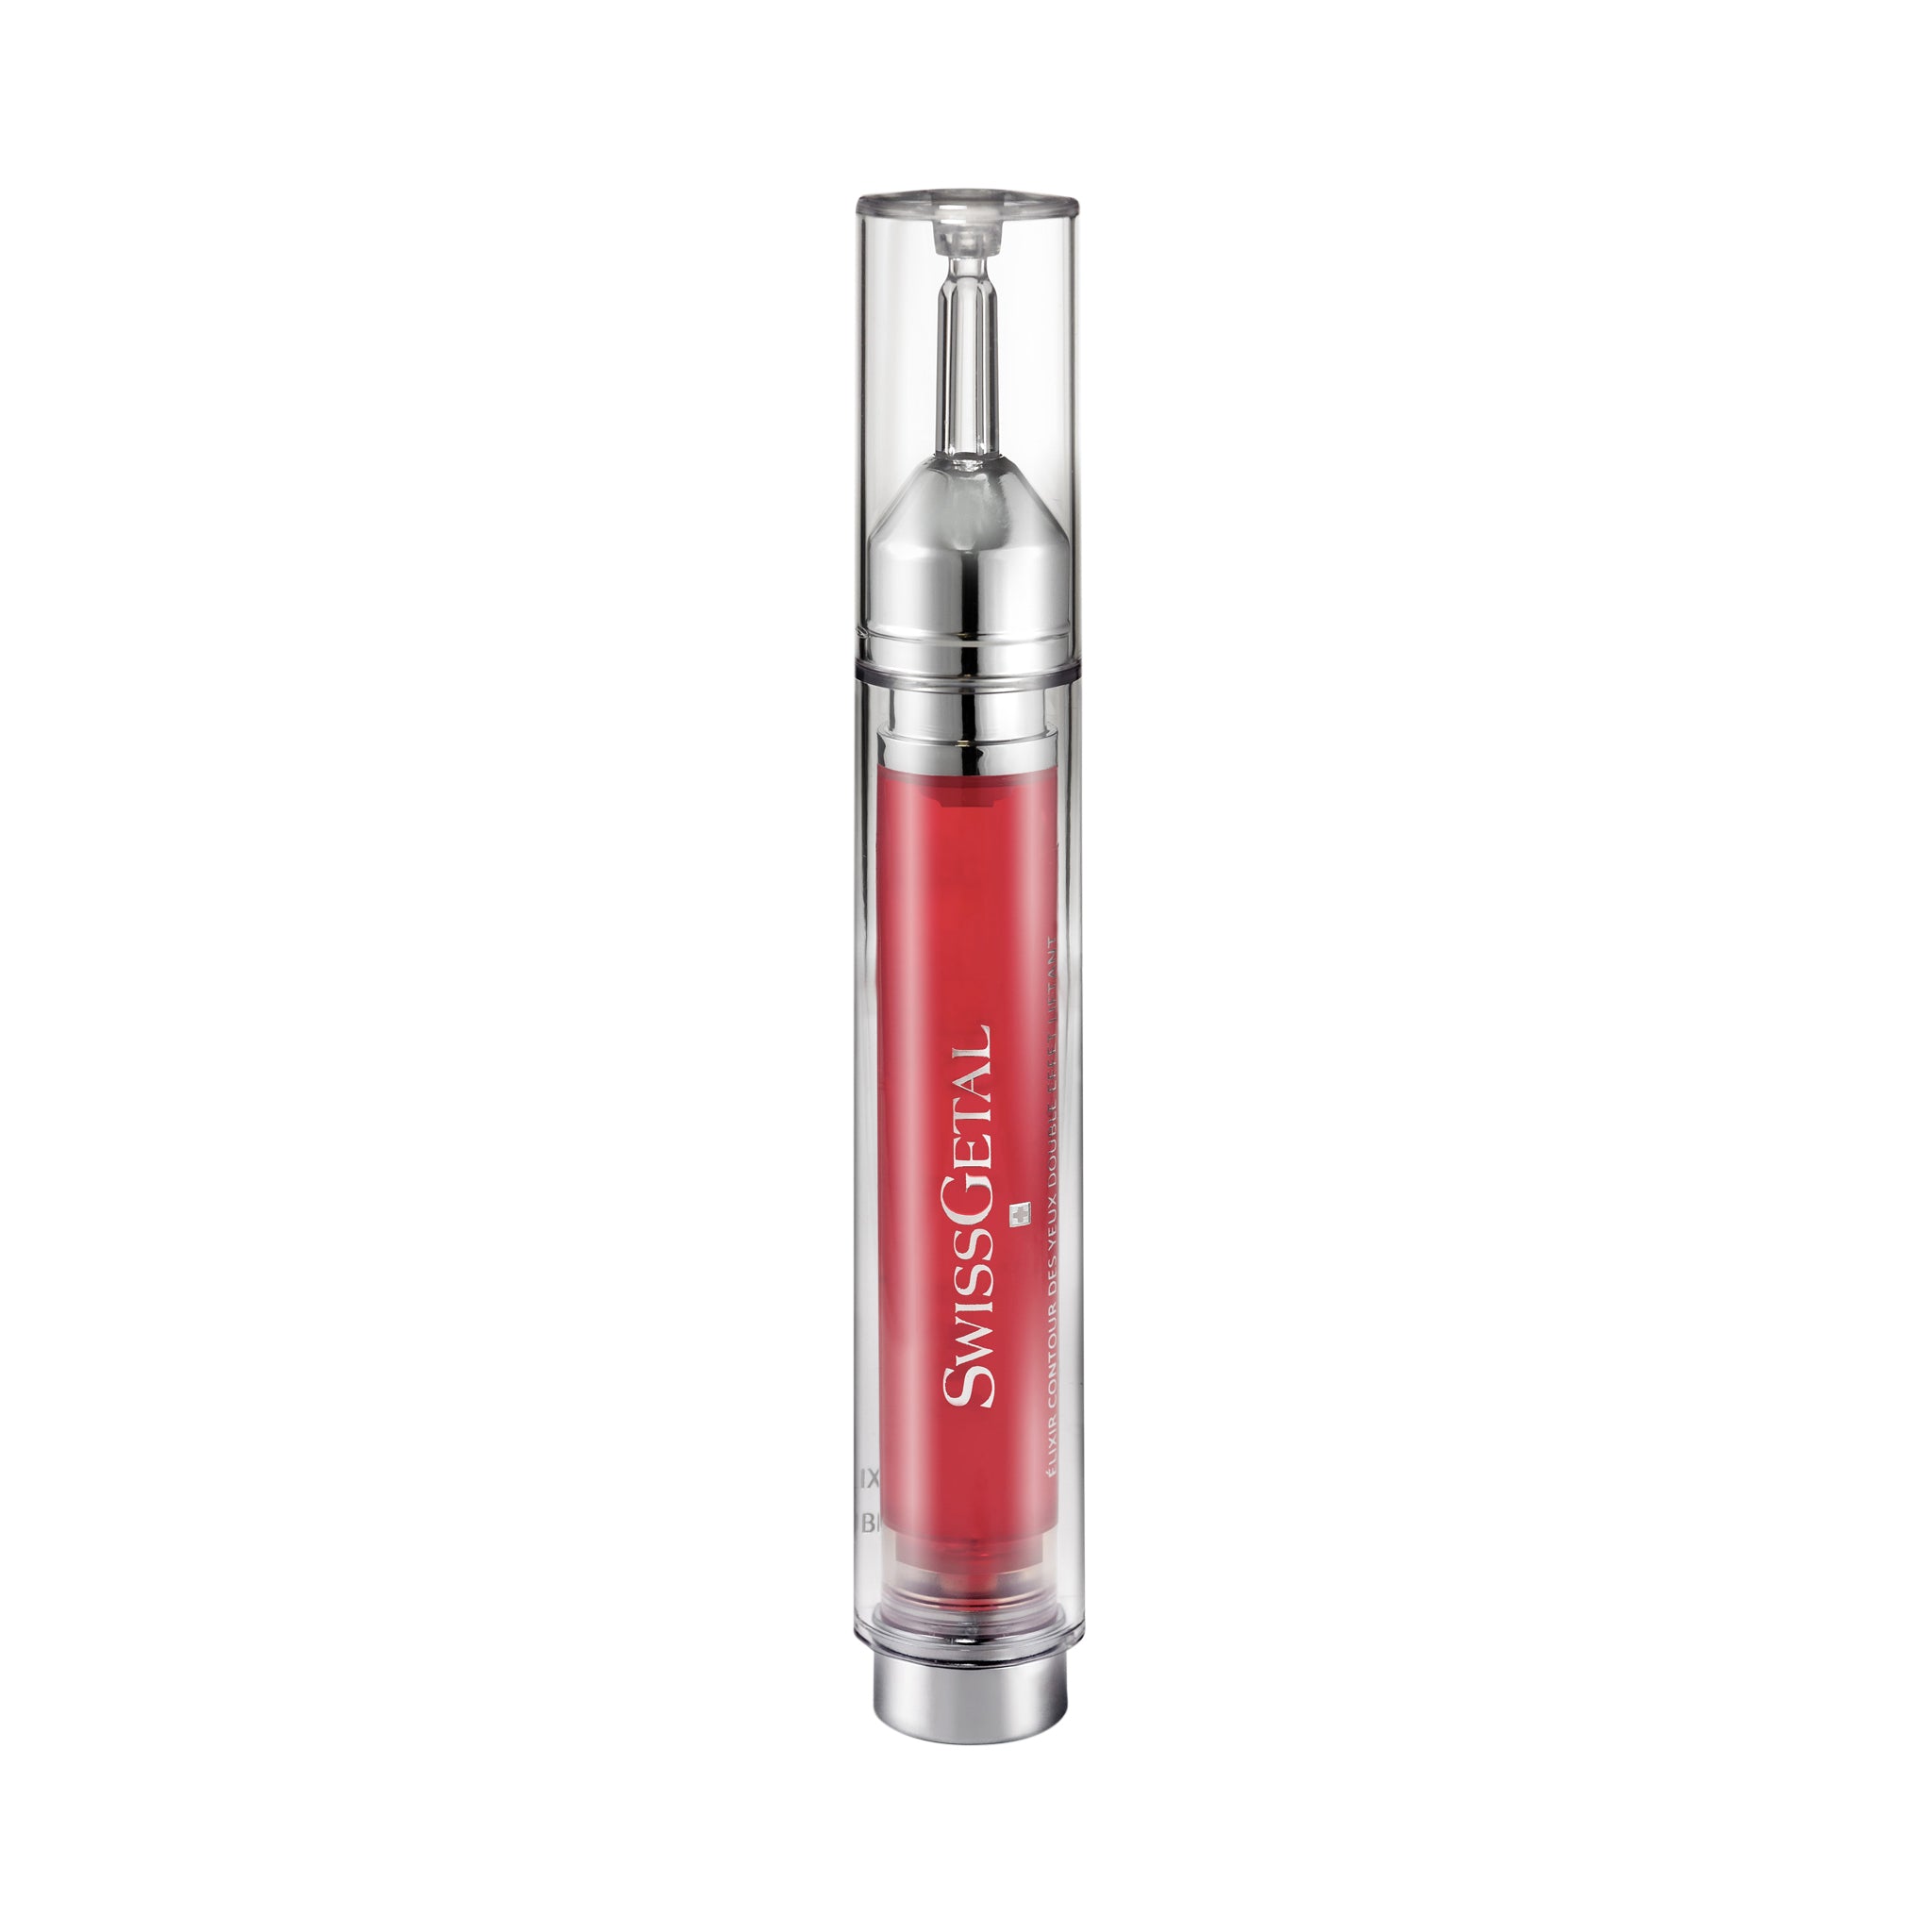 Double Lifting Effect Serum